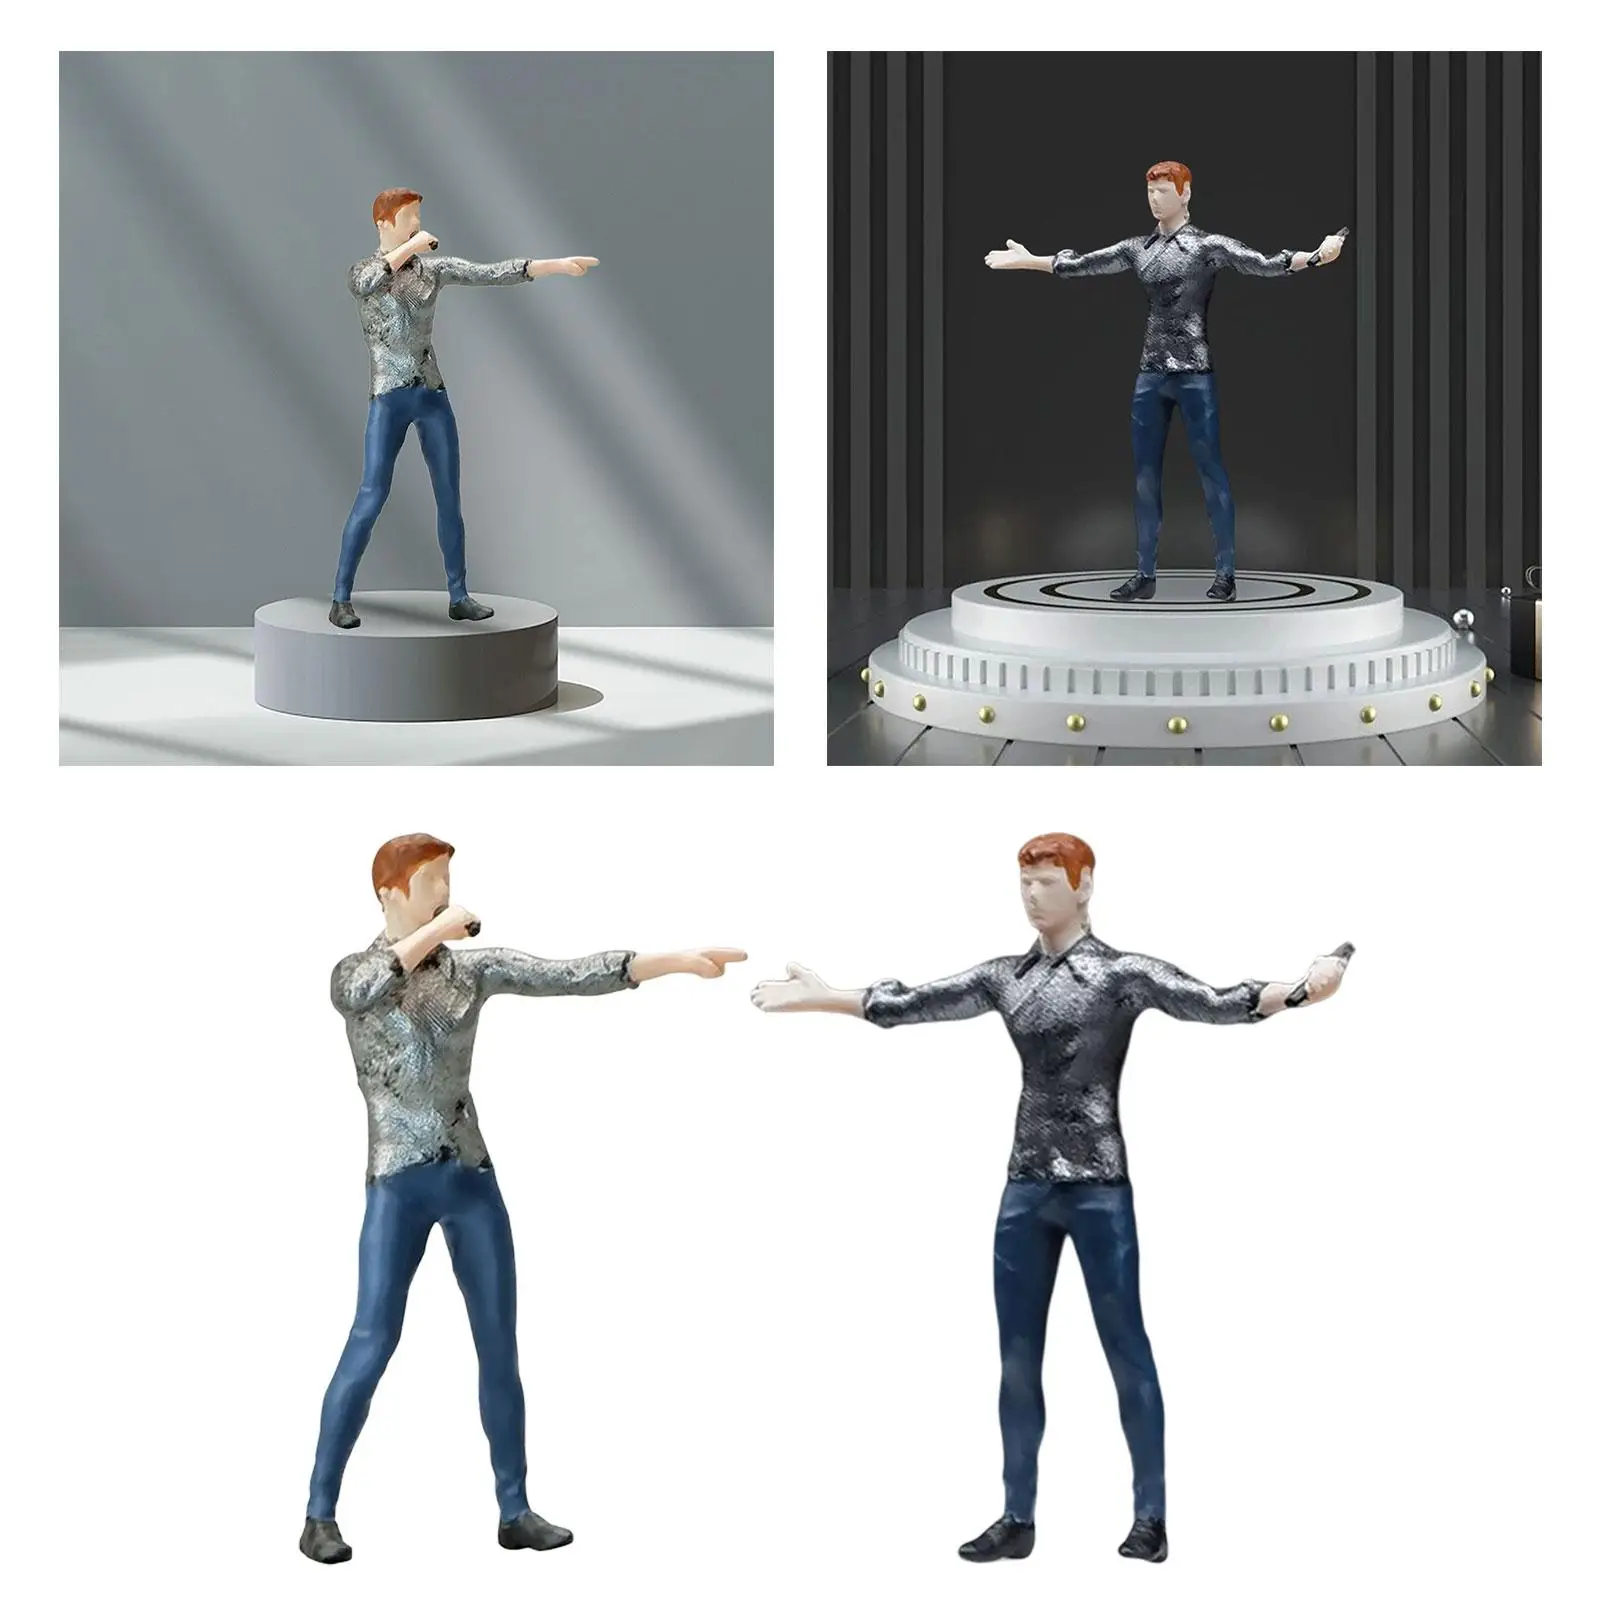 1: 64 Scale Miniature Singer Model Street Male Singer Display People Figurines for DIY Scene Diorama Photography Props Decor